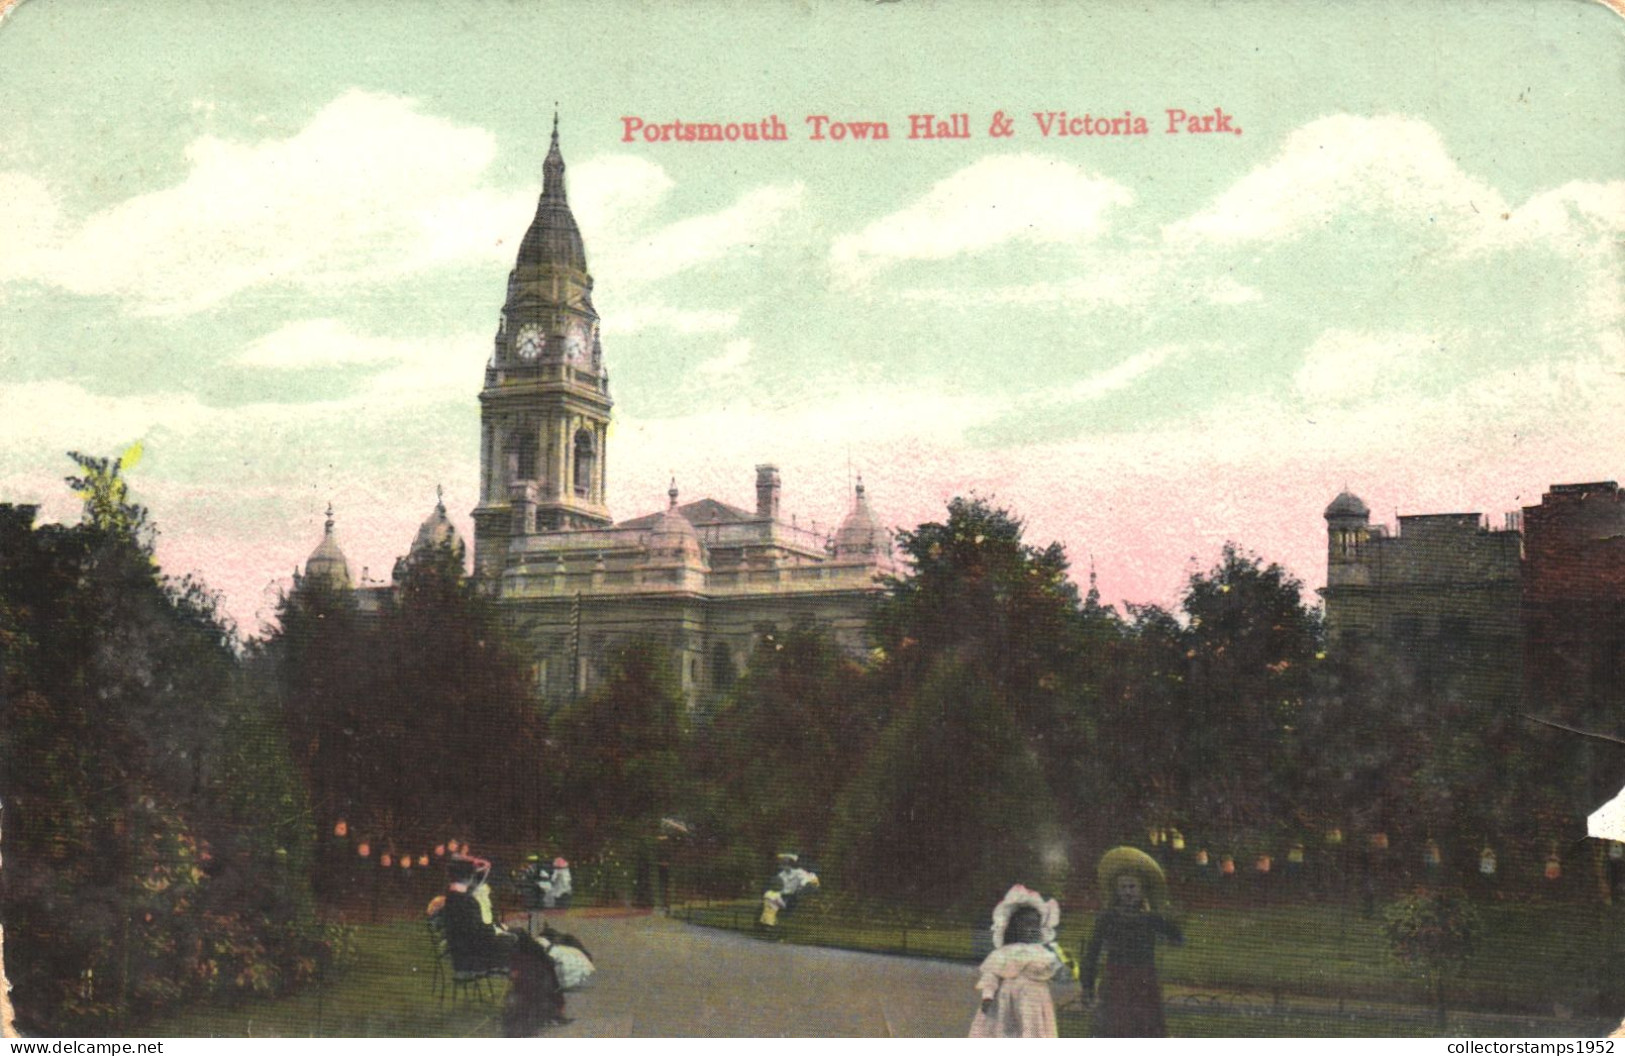 PORTSMOUTH, TOWN HALL, VICTORIA PARK, ARCHITECTURE, TOWER WITH CLOCK, UNITED KINGDOM - Portsmouth